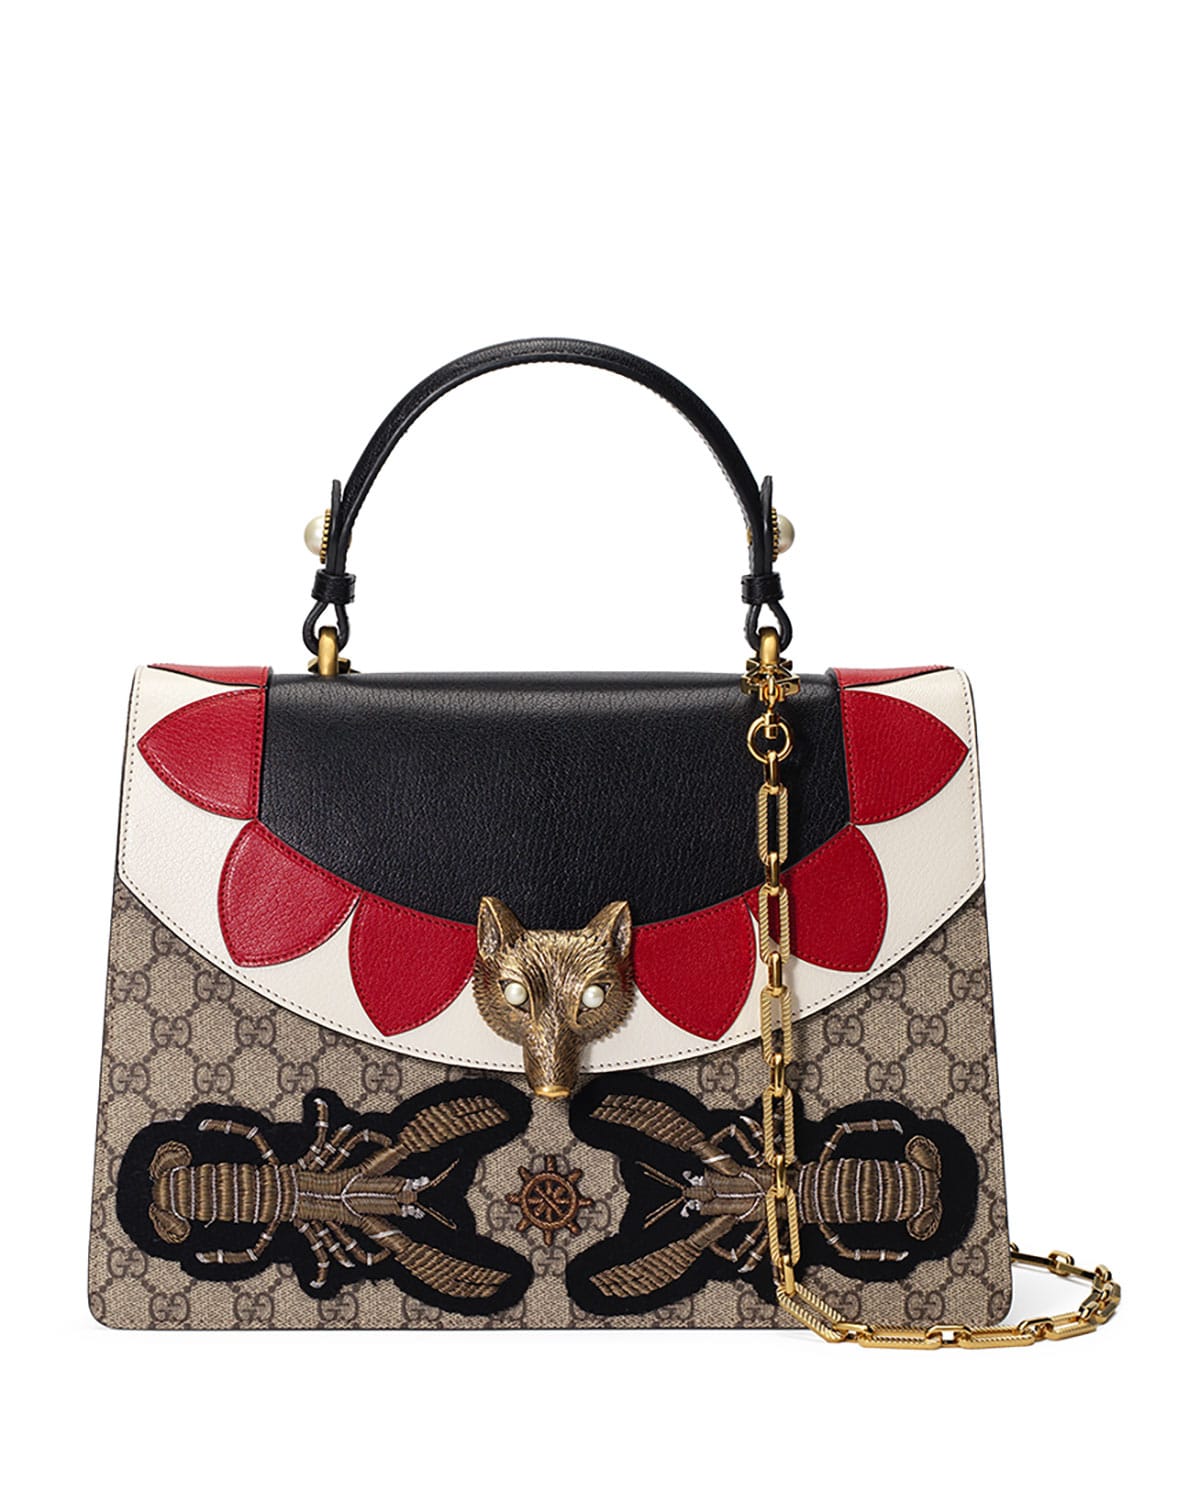 Gucci Spring/Summer 2017 Bag Collection | Spotted Fashion